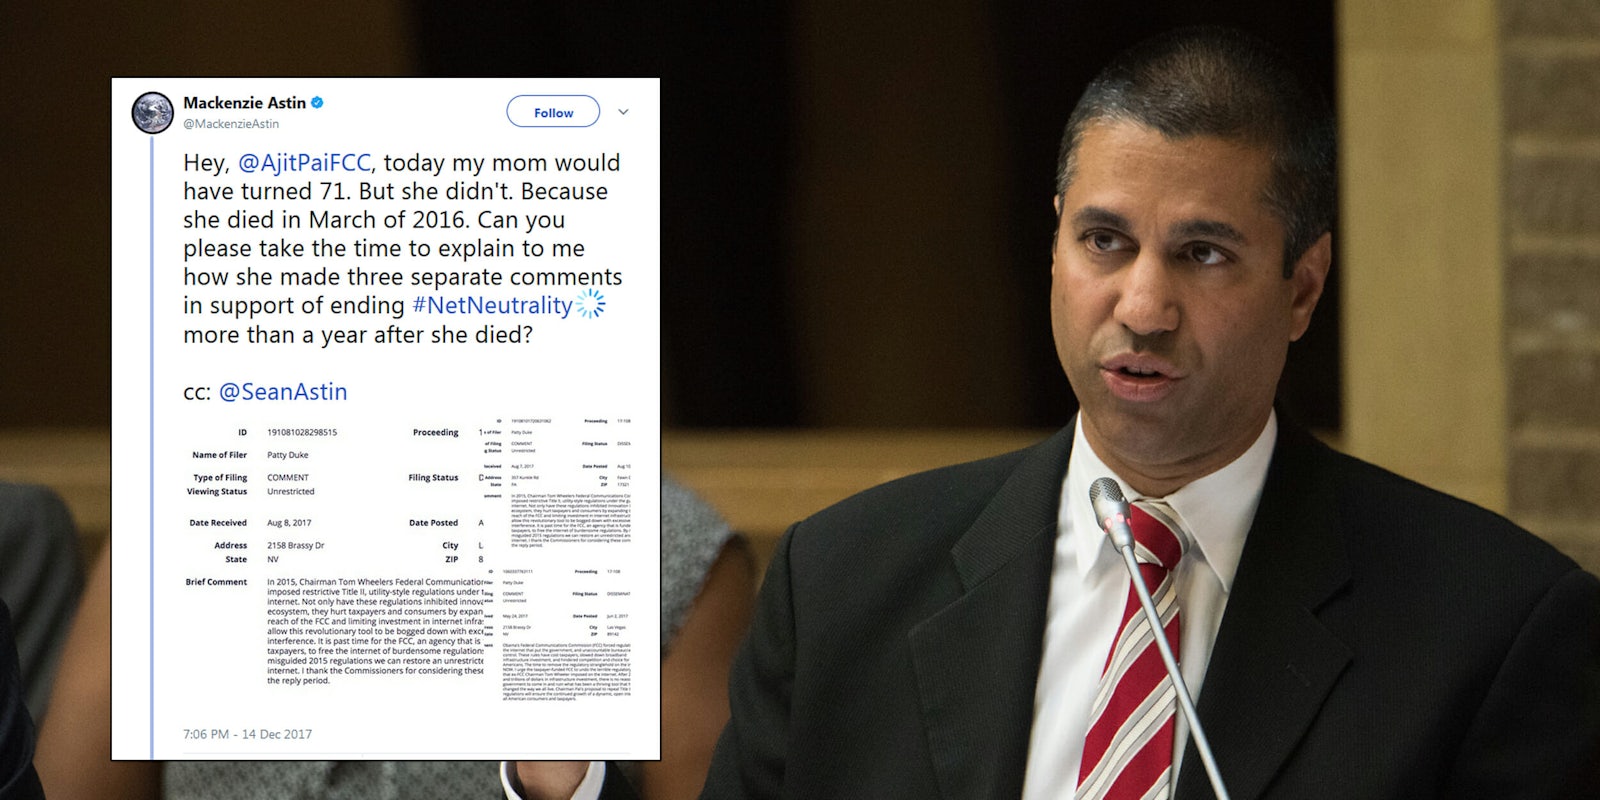 One Twitter user has exemplified the curious nature of fraudulent comments left on the Federal Communications Commission's (FCC) website in favor of repealing net neutrality rules by posting three comments that were posted in the name of her dead mother.